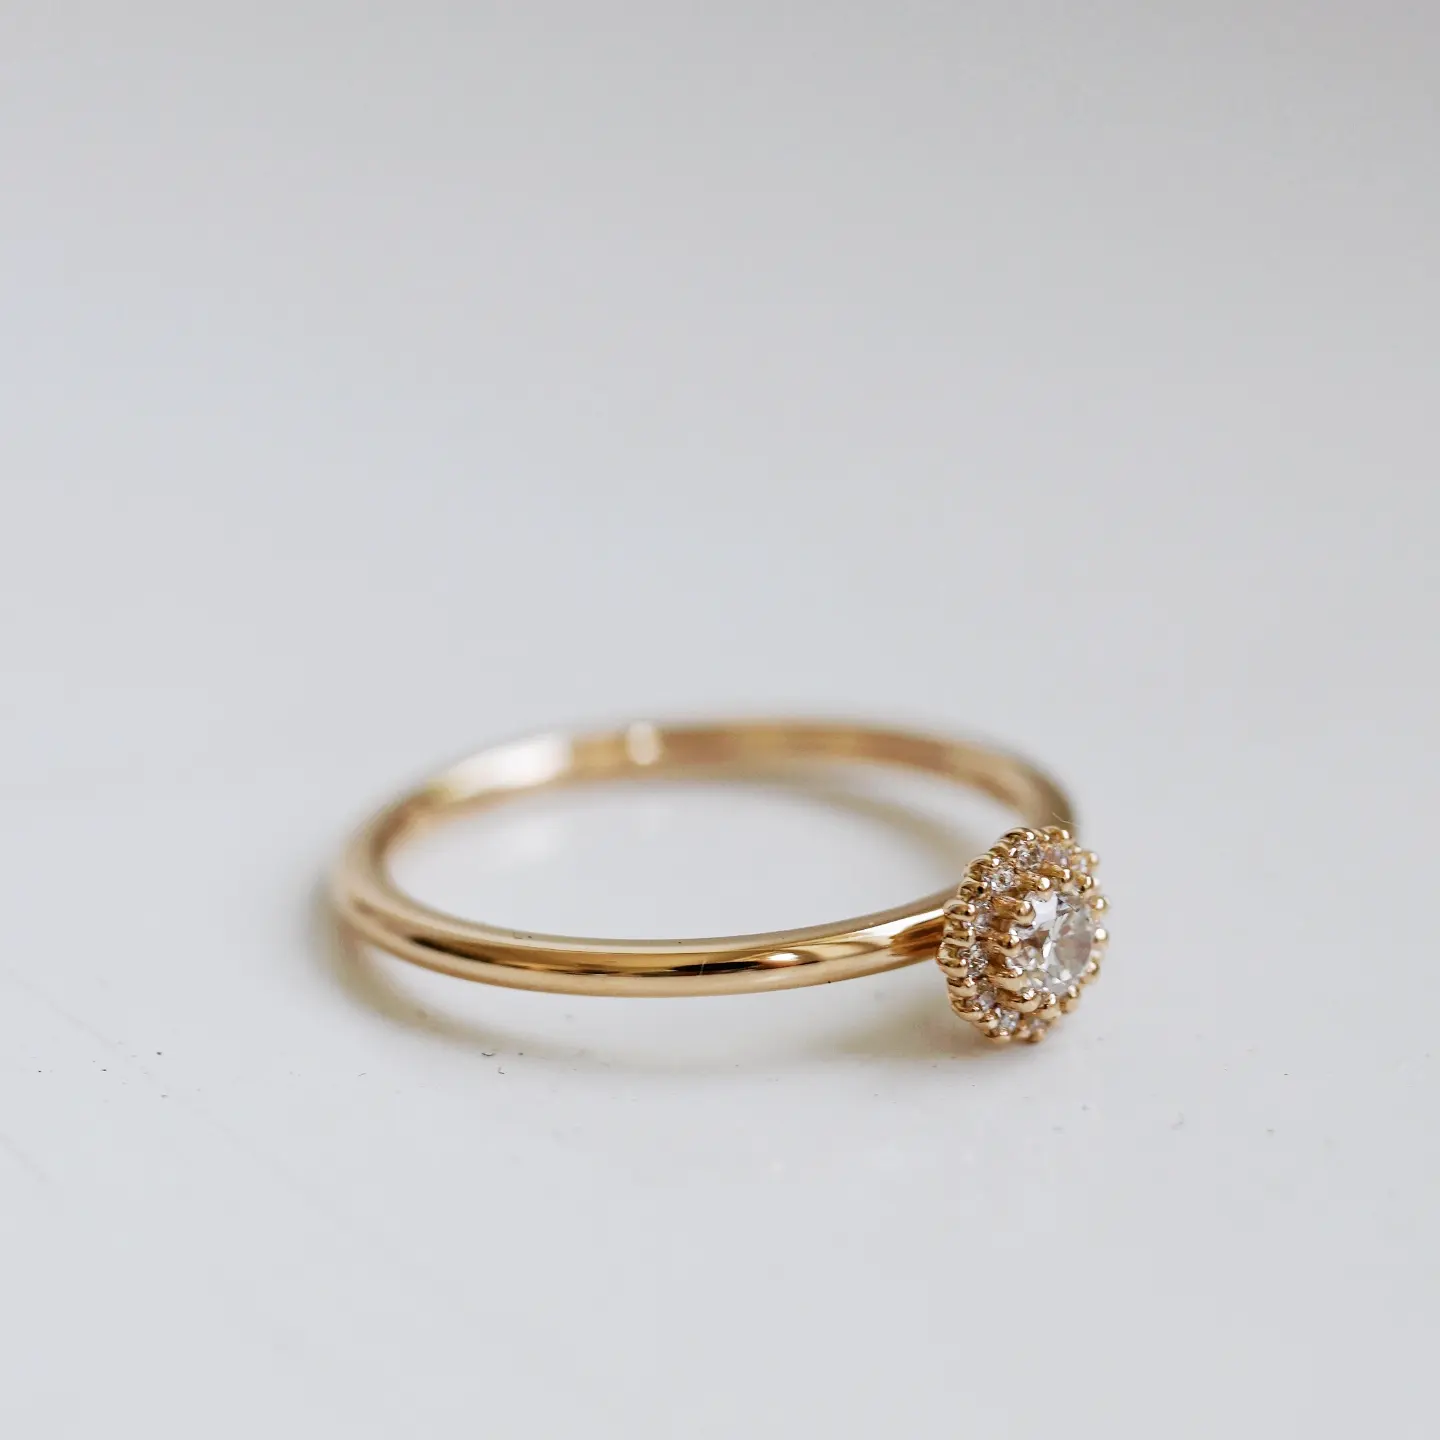 "Nina" ring in gold with diamonds